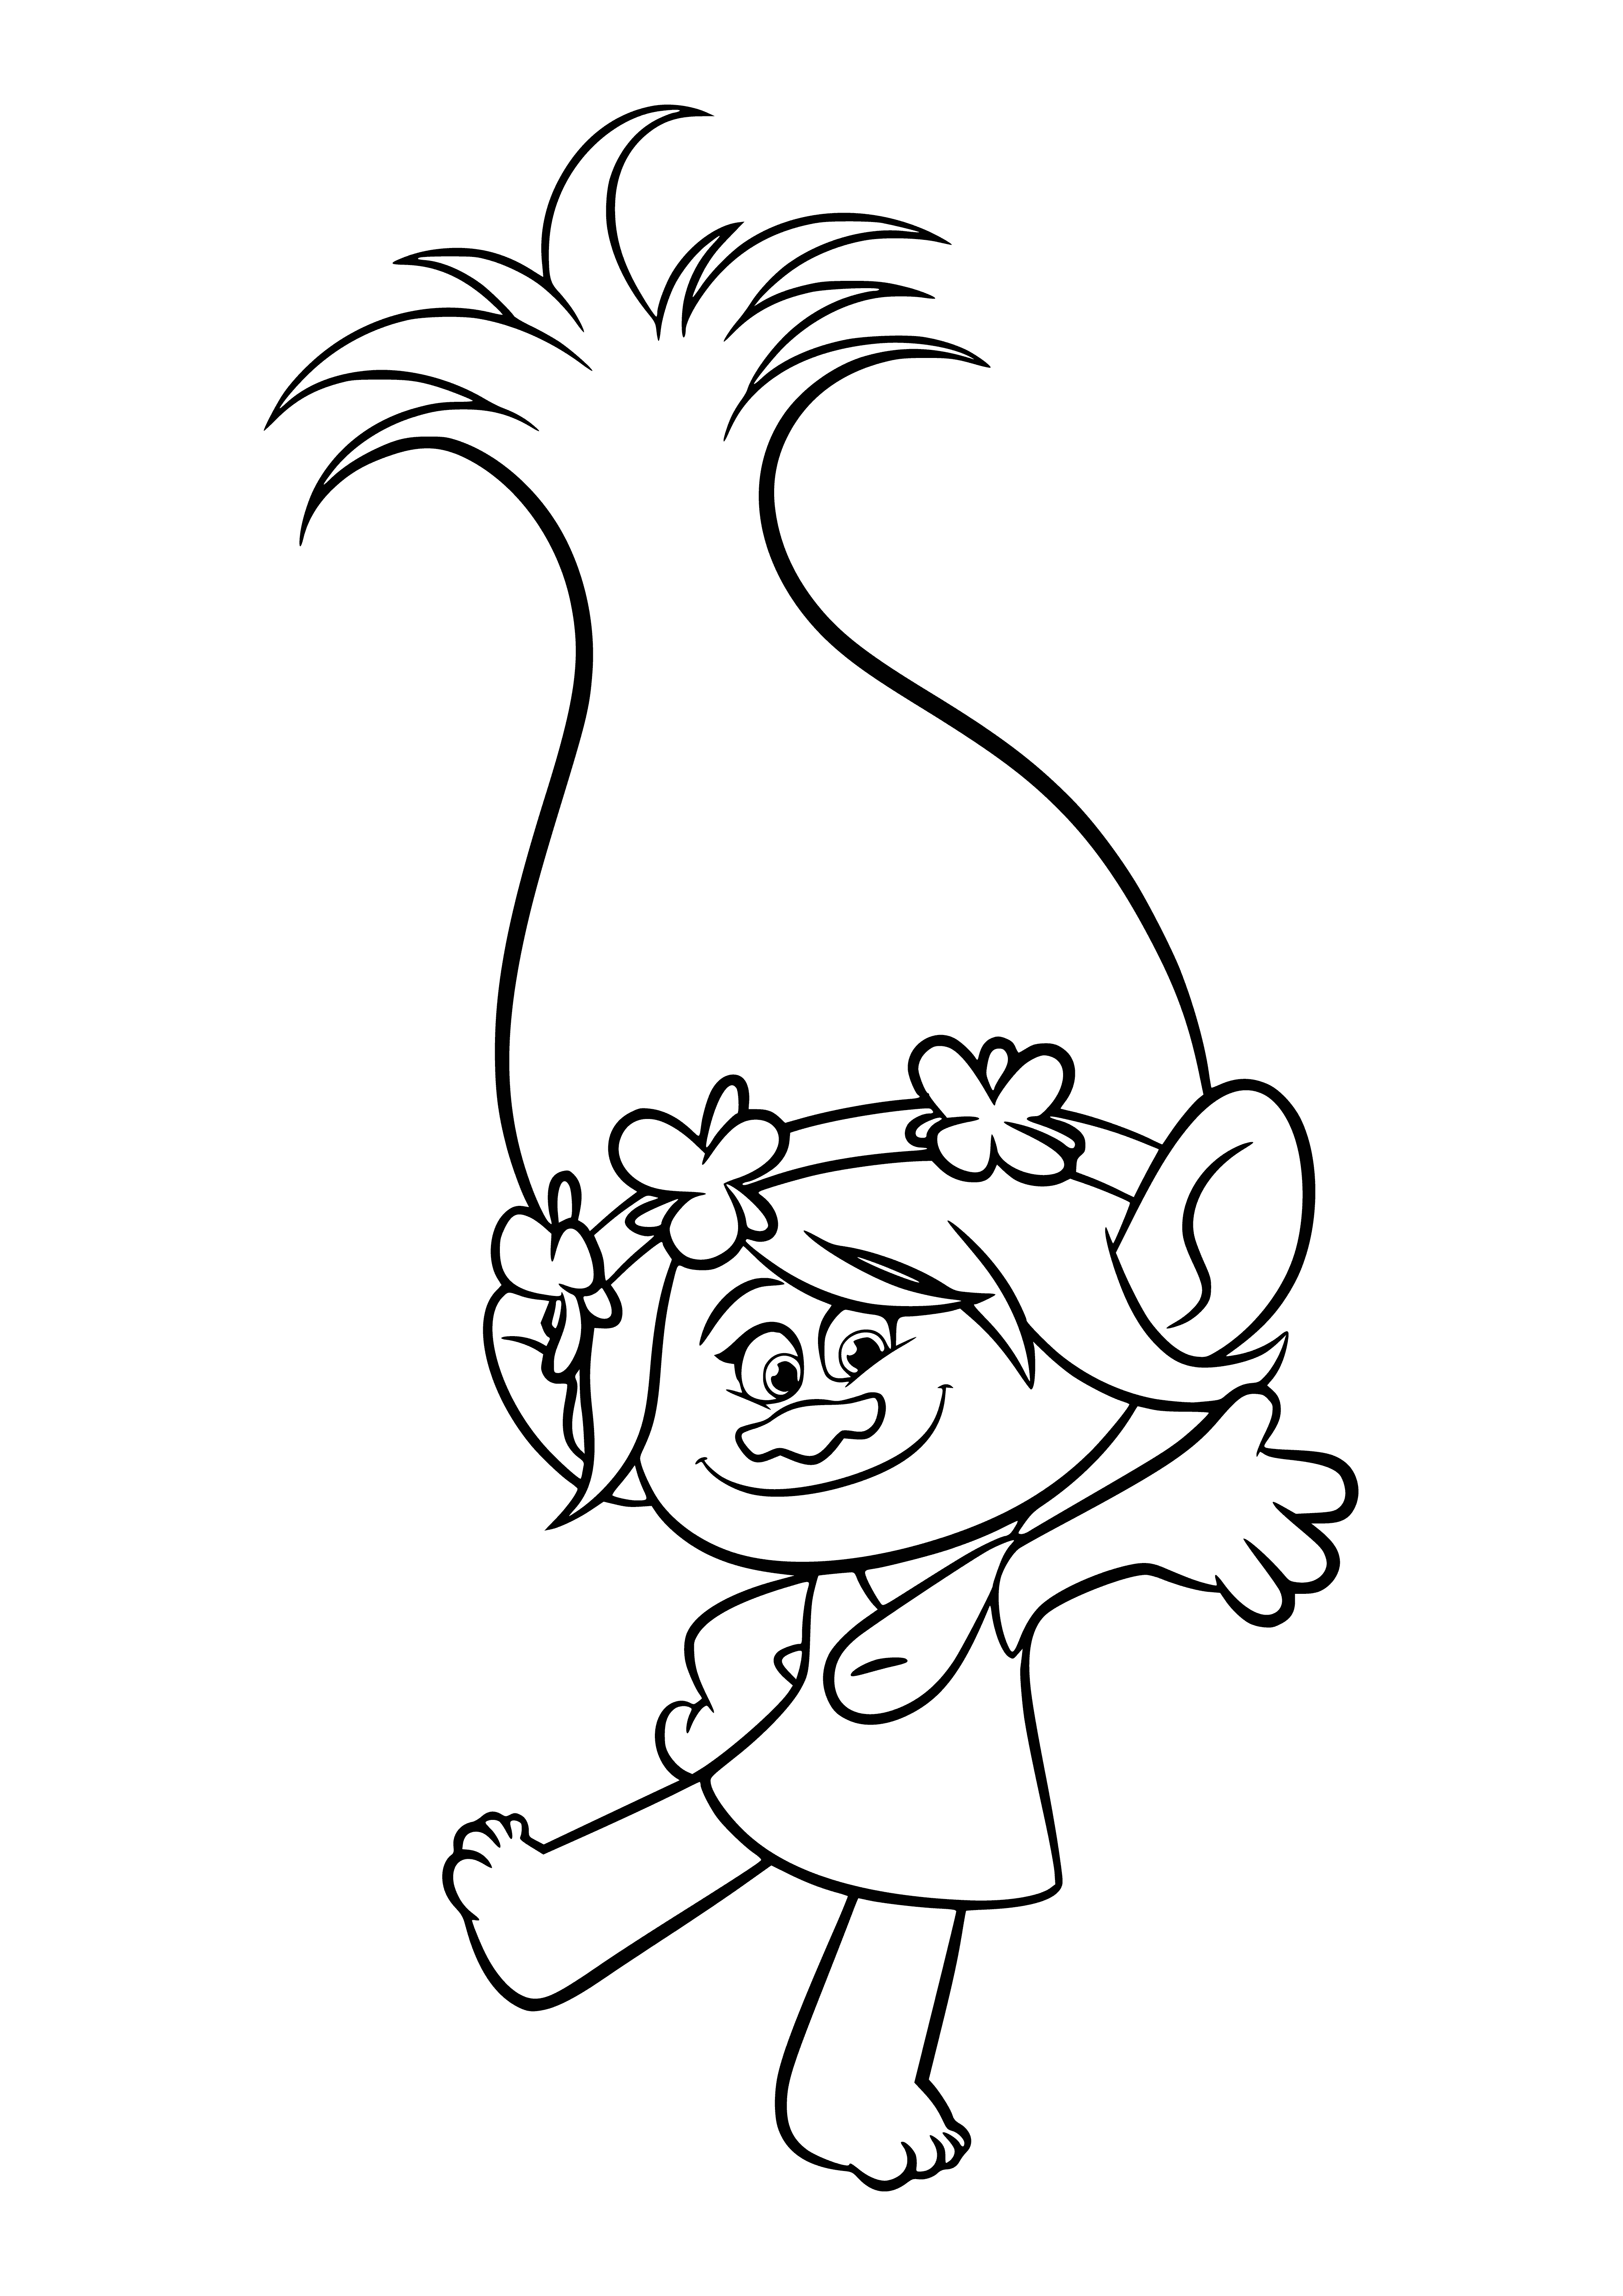 coloring page: Girl in pink dress dancing with two trolls - one pink, one blue - near a rainbow and castle.